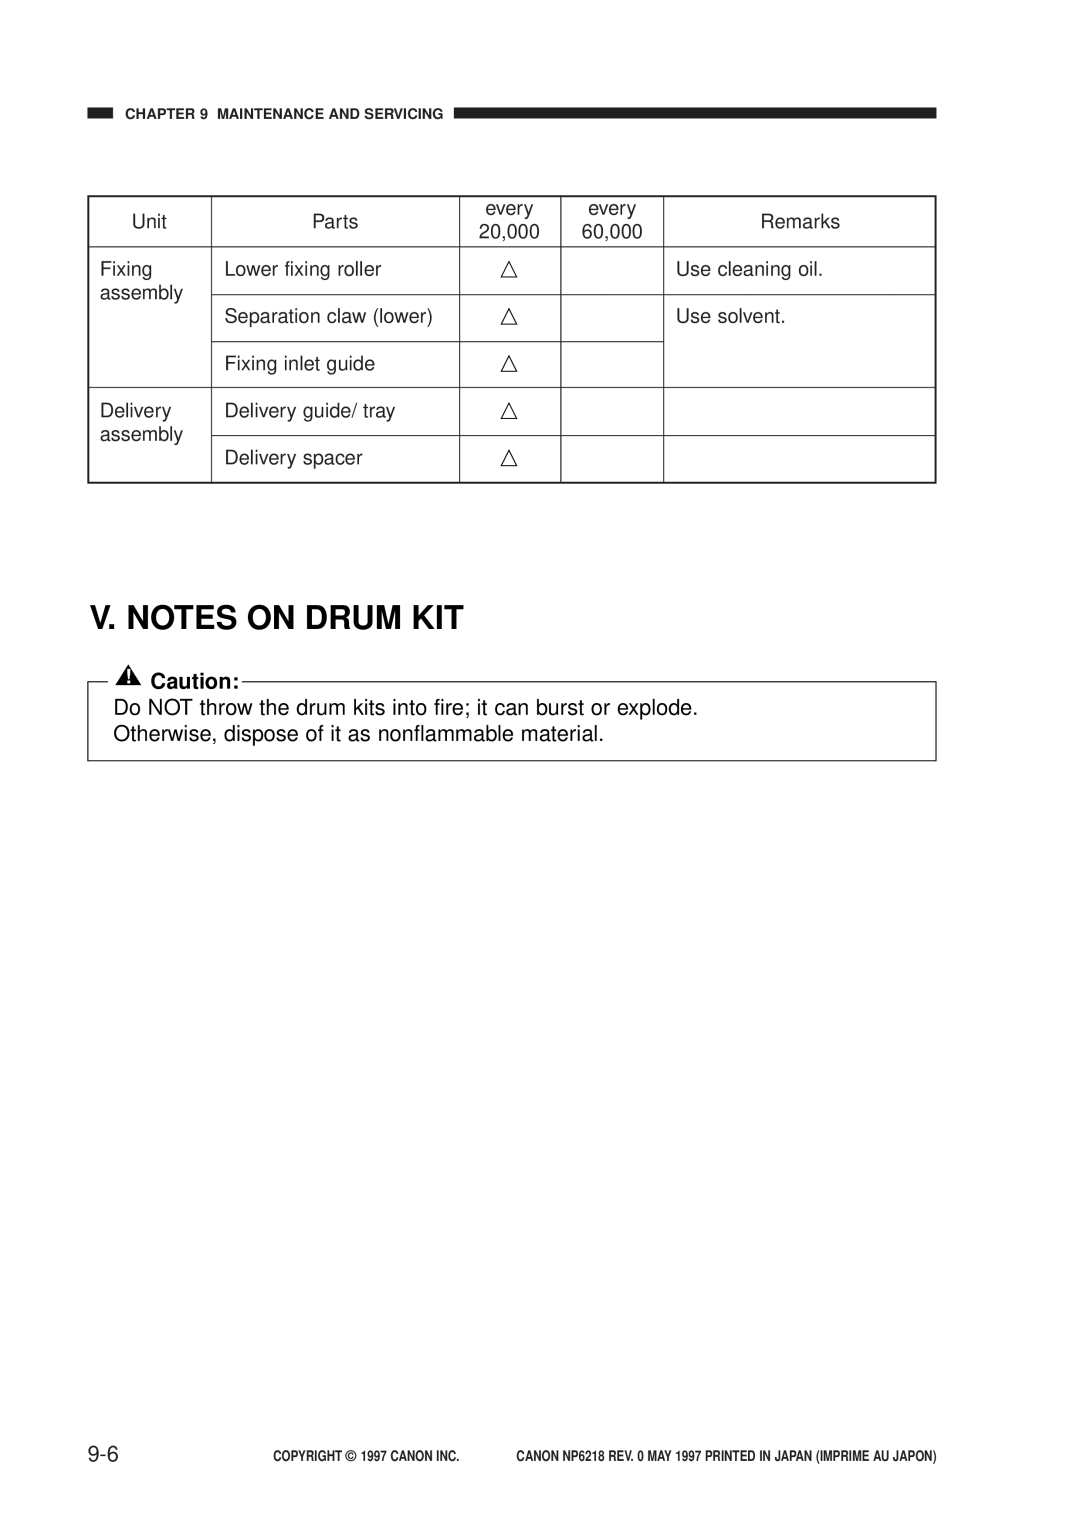 Canon FY8-13EX-000, NP6218 service manual V. Notes On Drum Kit, Do NOT throw the drum kits into fire it can burst or explode 